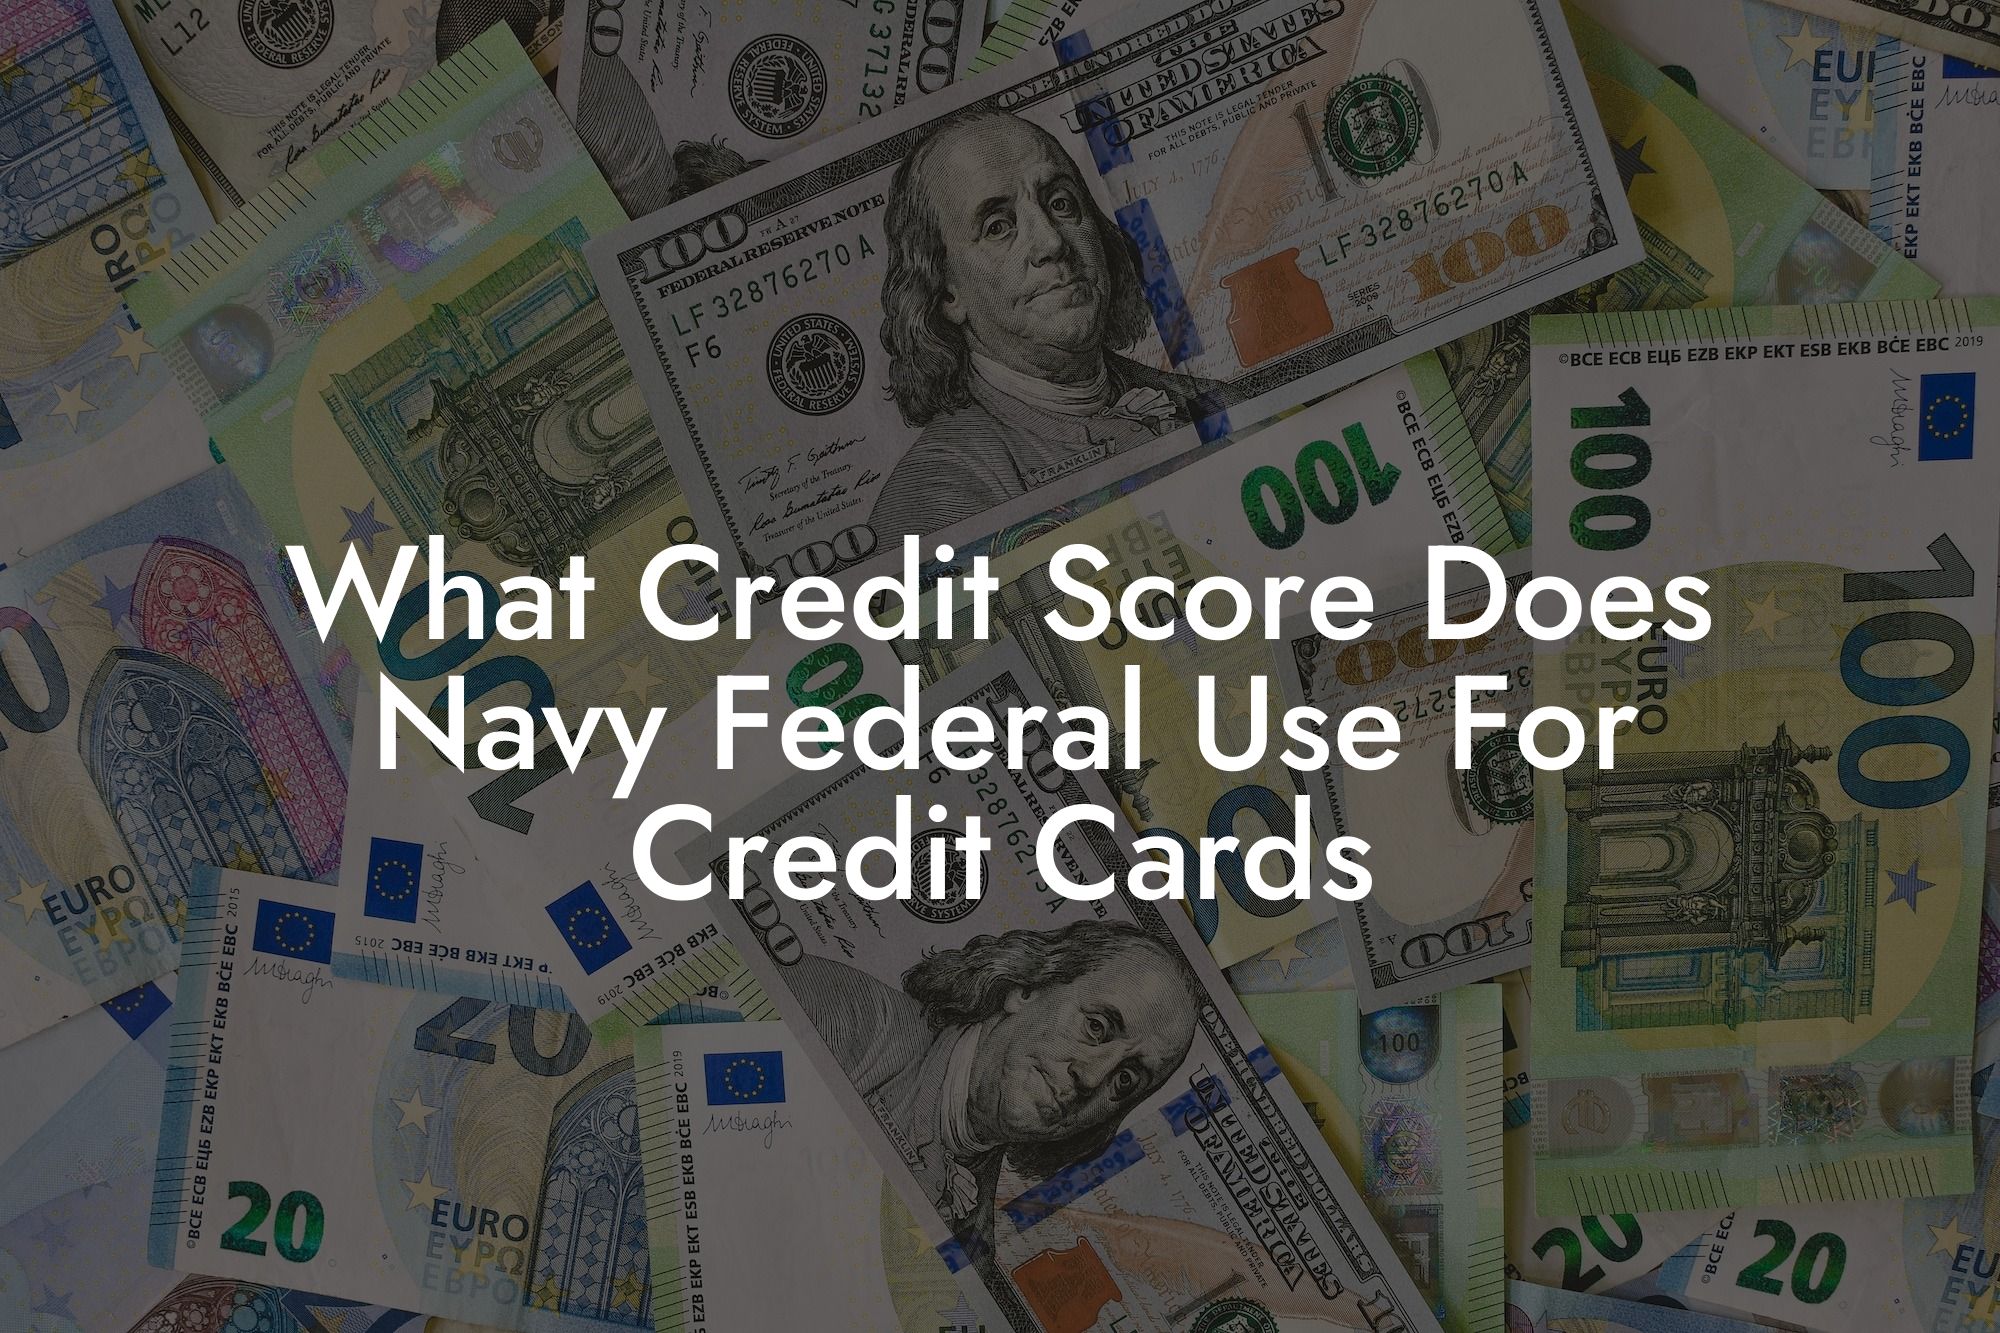 What Credit Score Does Navy Federal Use For Credit Cards